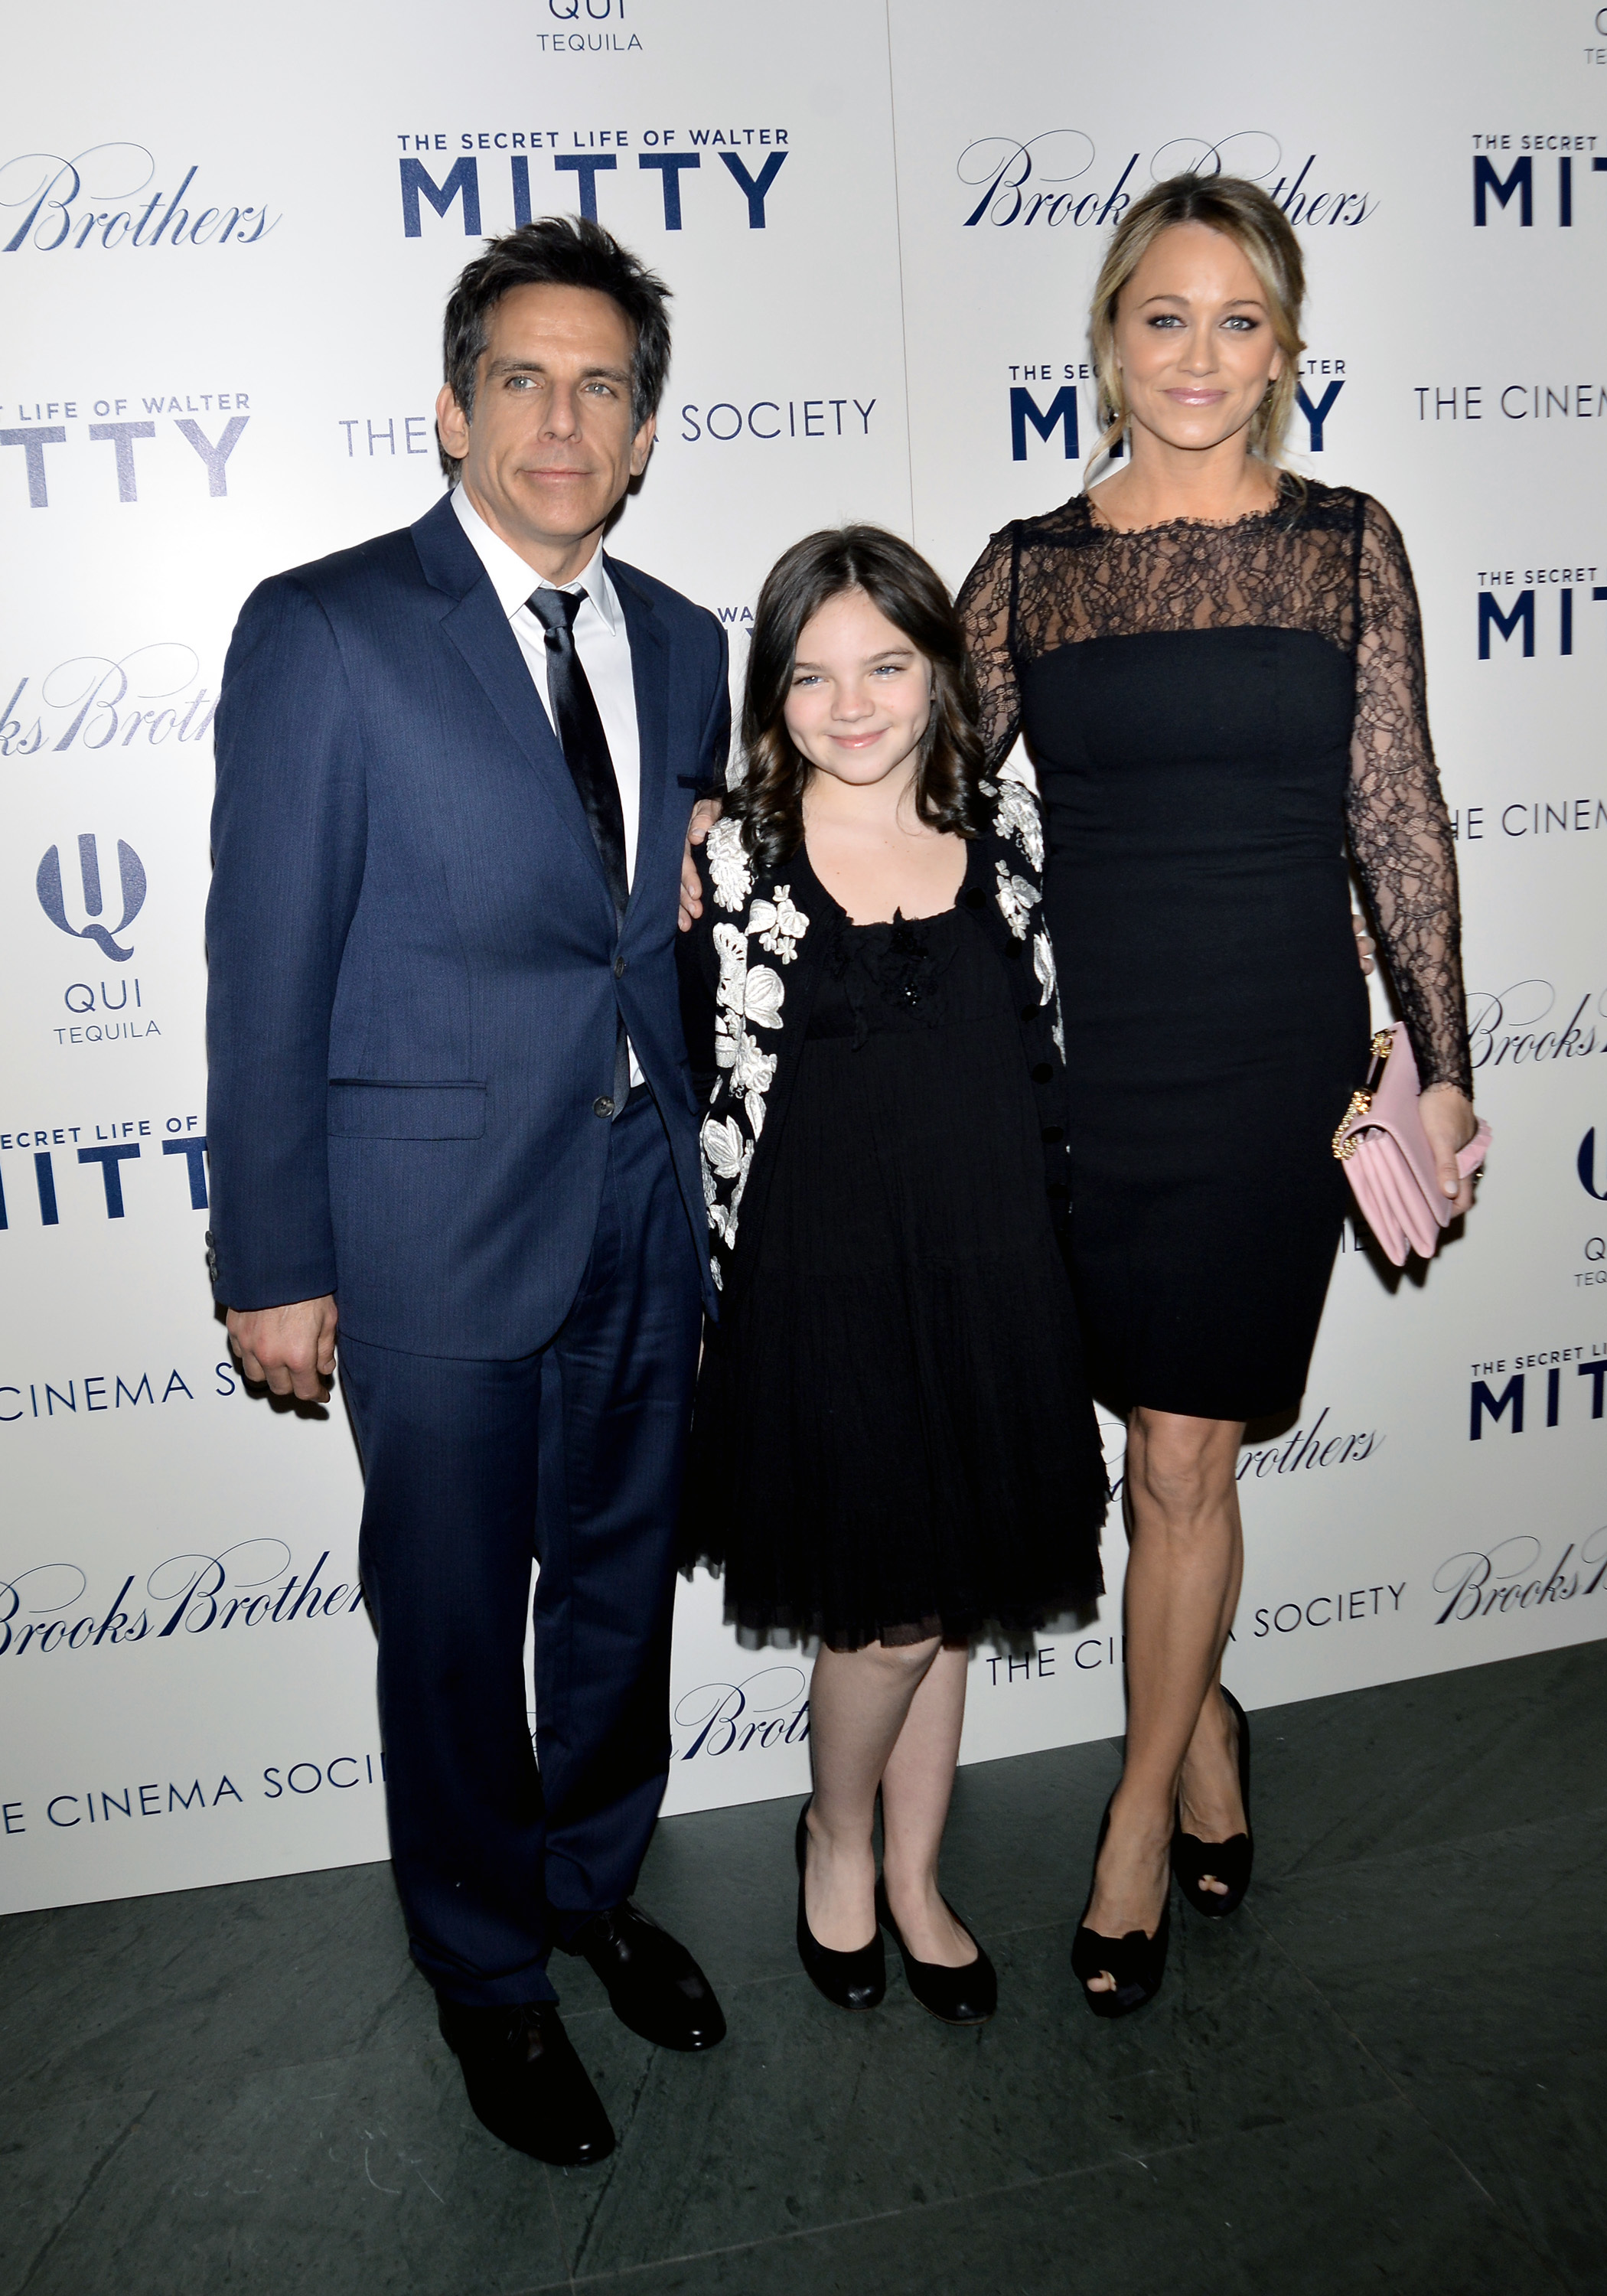 <p><a href="https://www.wonderwall.com/celebrity/profiles/overview/ben-stiller-242.article">Ben Stiller</a> and wife Christine Taylor posed with then-11-year-old daughter Ella Stiller at a screening of "The Secret Life of Walter Mitty" on Dec. 18, 2013. Keep reading to see Ella as an adult at the <a href="https://www.wonderwall.com/awards-events/2022-emmy-awards-see-all-the-photos-from-the-red-carpet-649829.gallery">2022 Emmys</a> with her dad...</p>